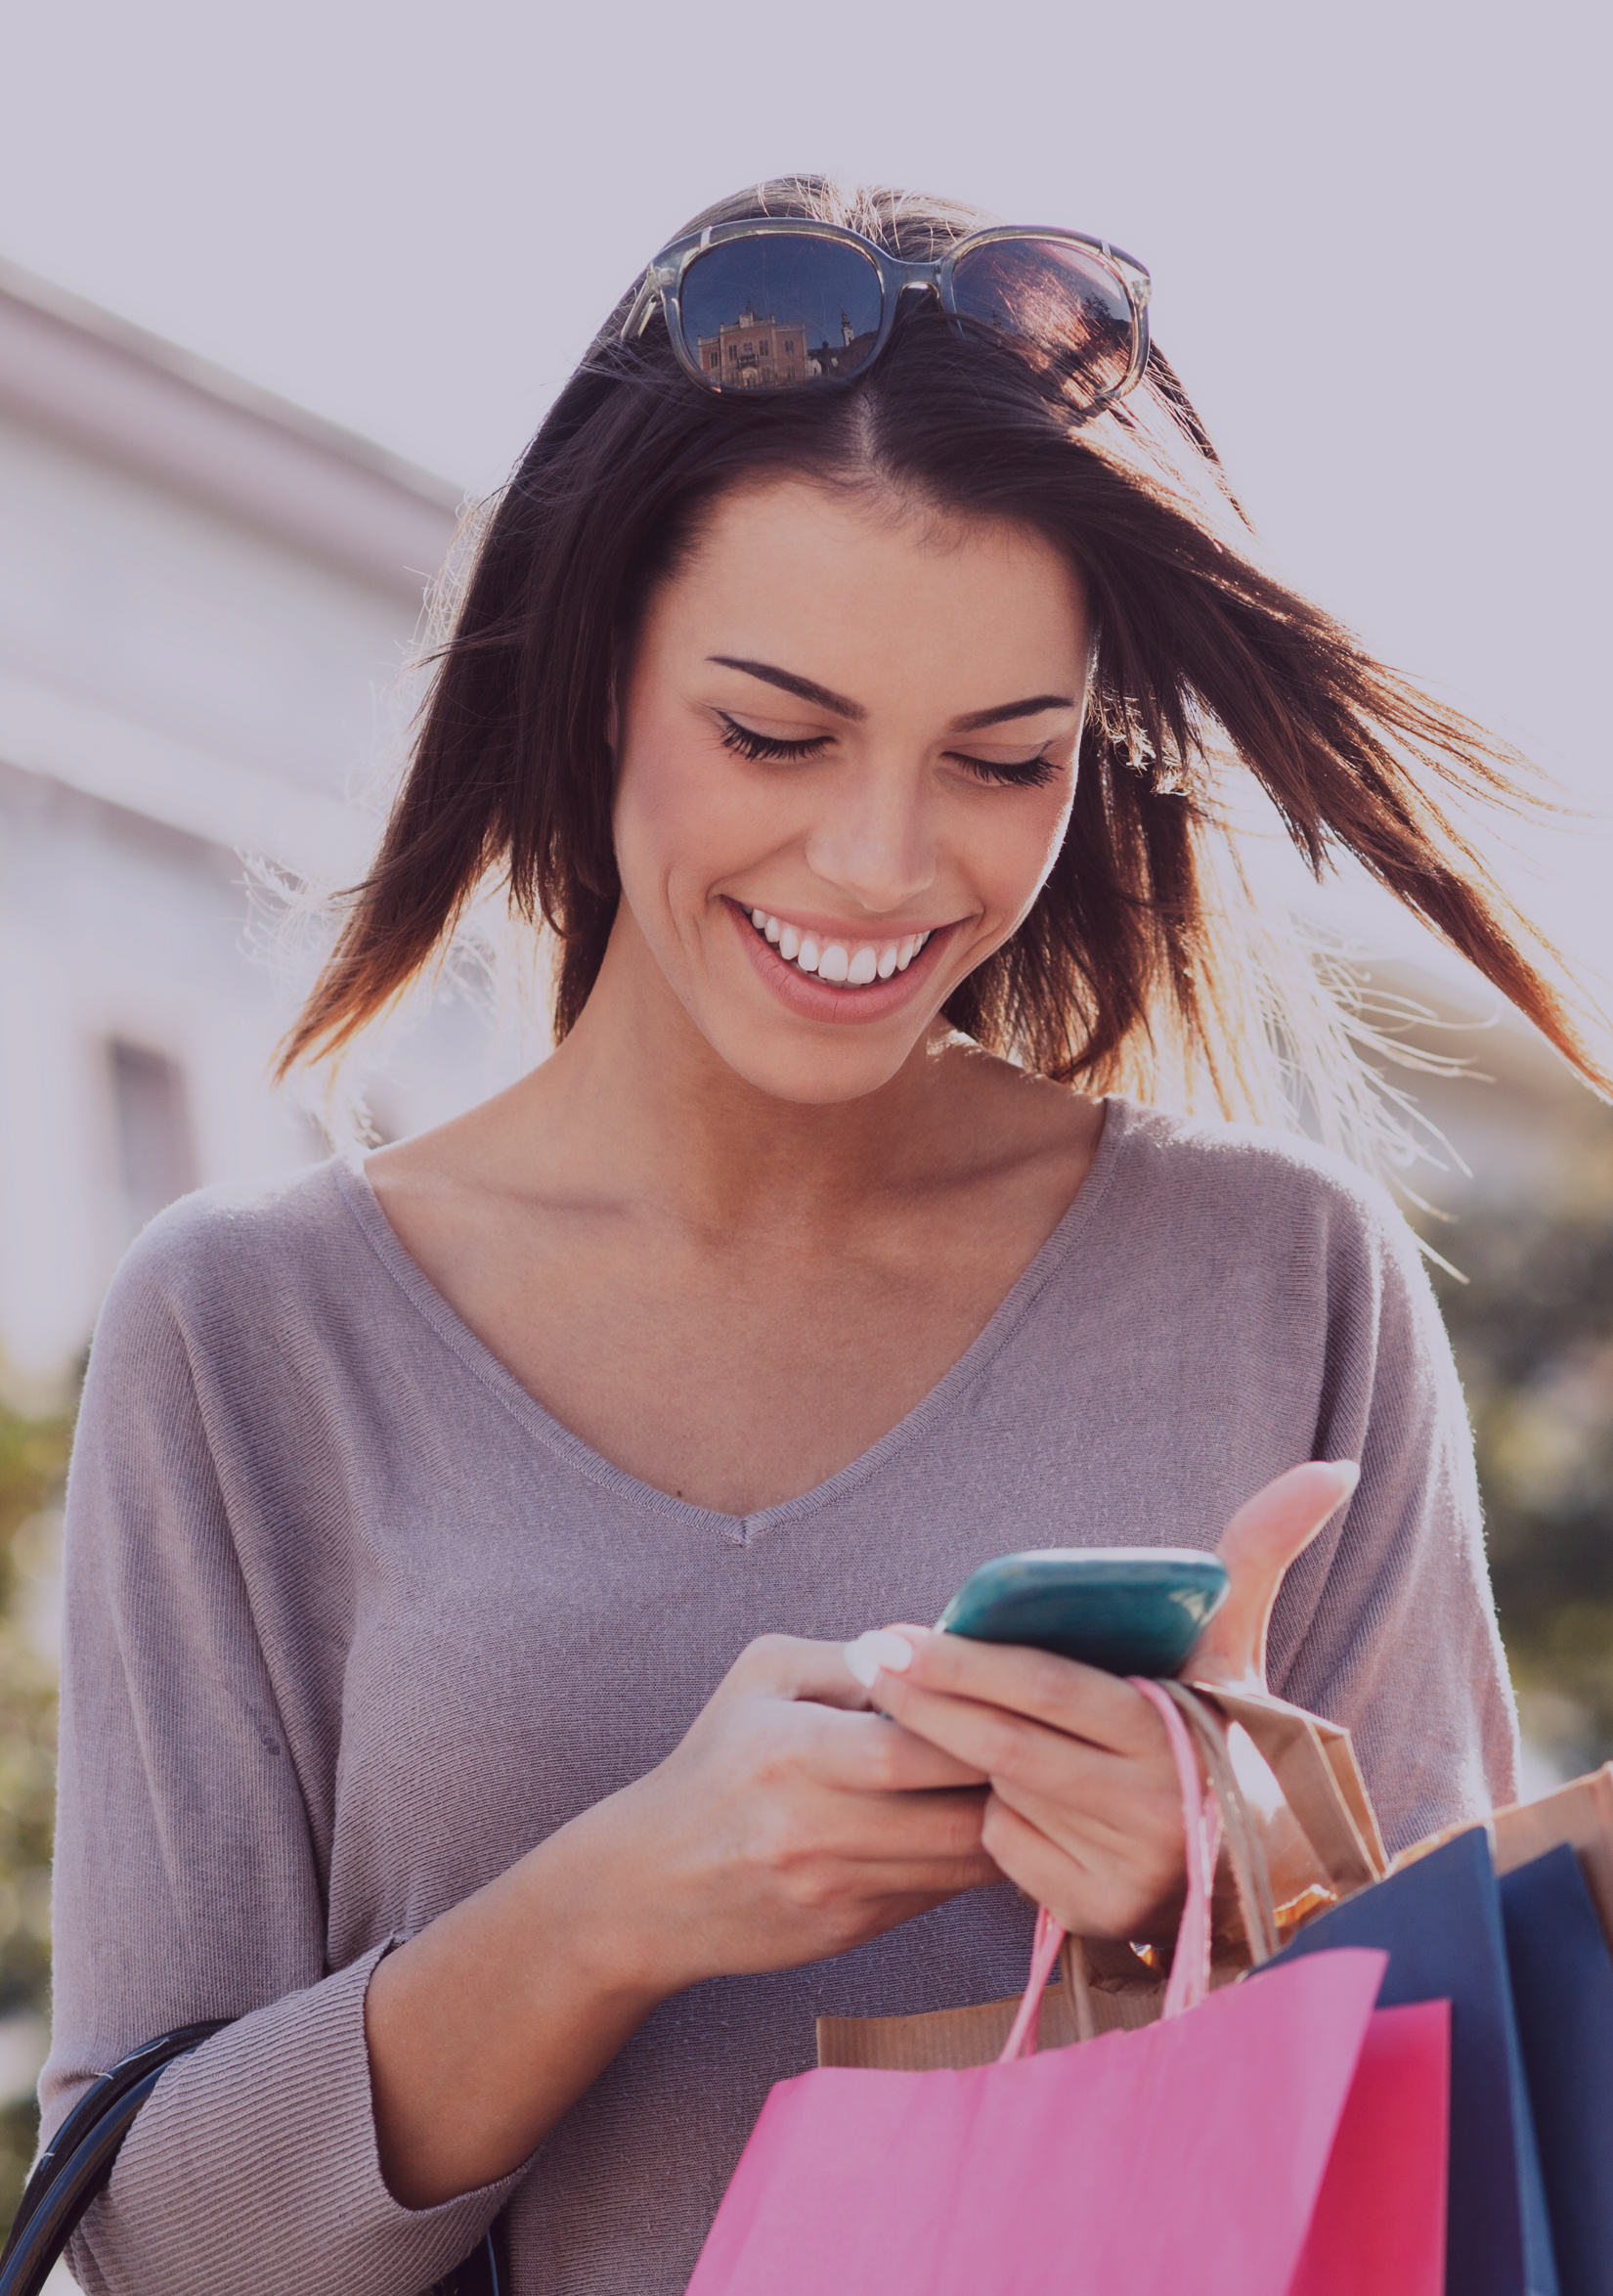 Young smiling woman checking her cell phone, holding shopping bags